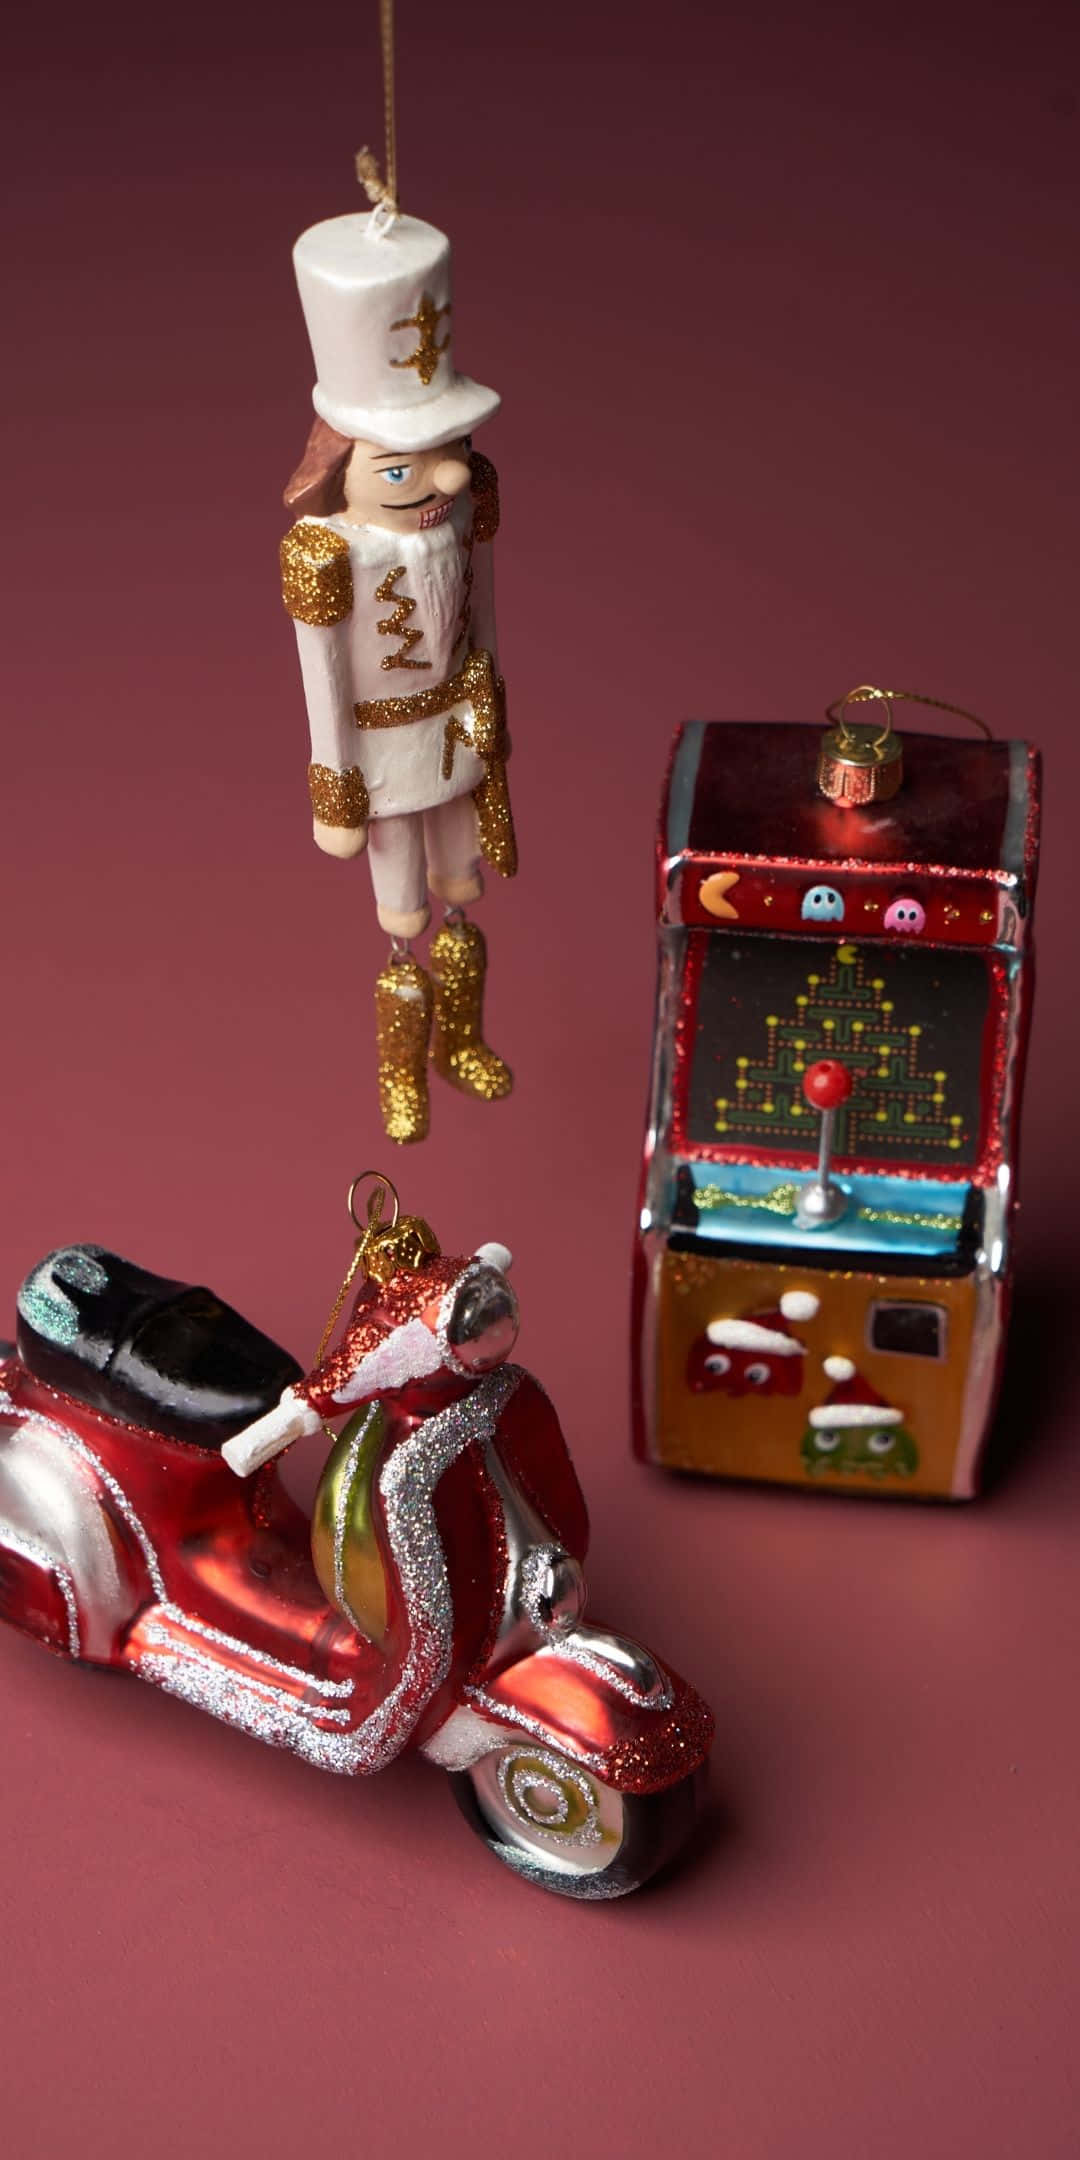 A Nutcracker Ornament And A Motorcycle Ornament Background